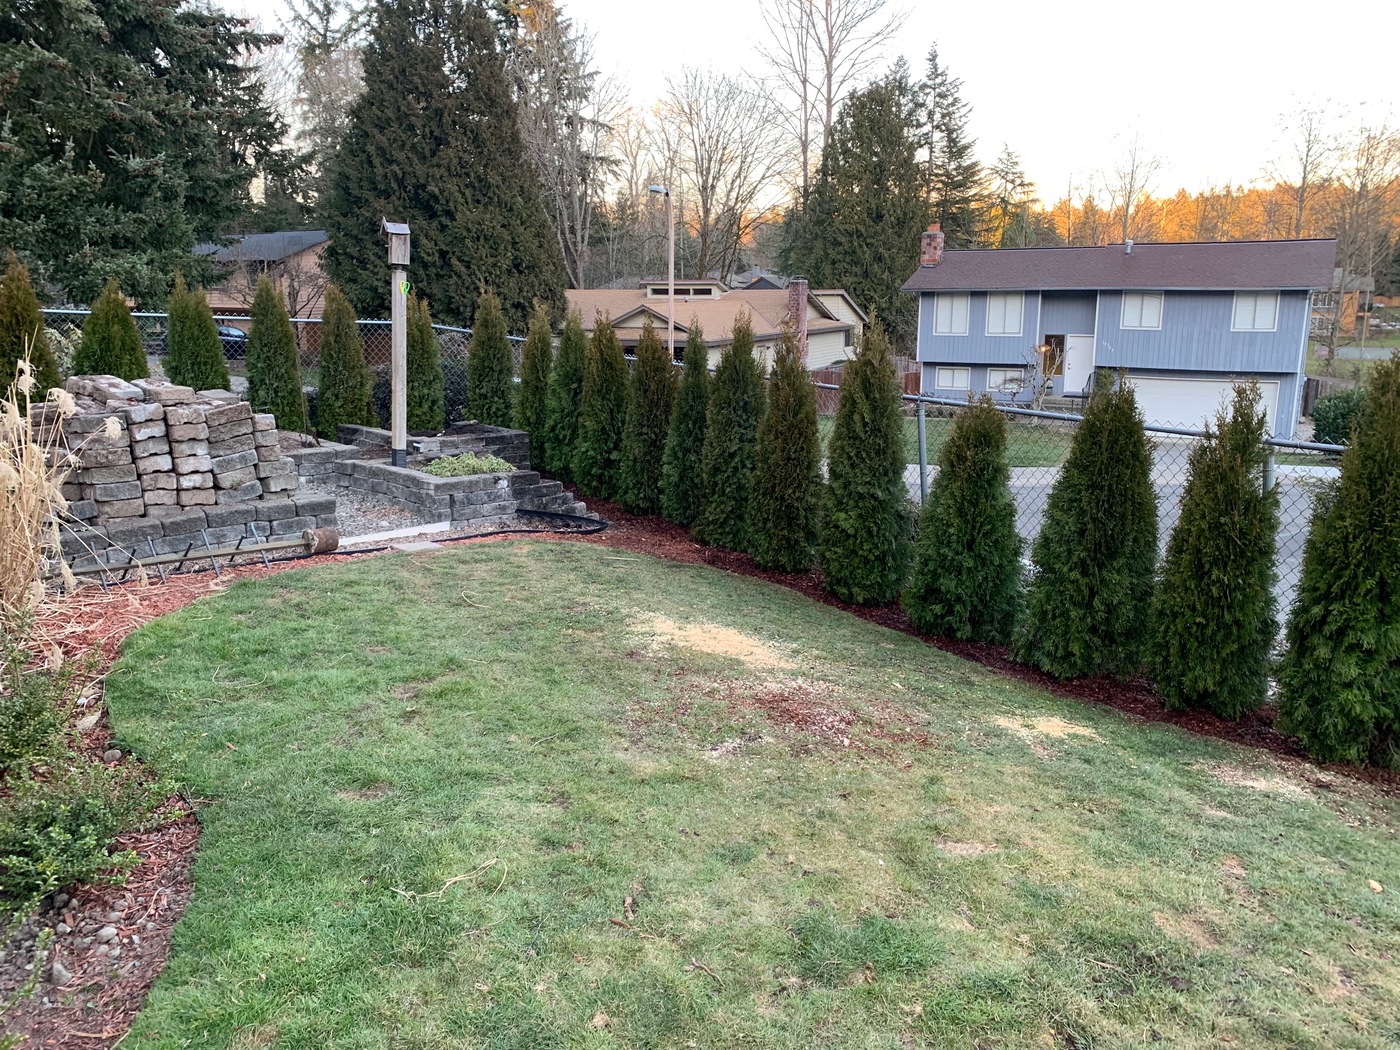 Nearly all the arborvitae are in.